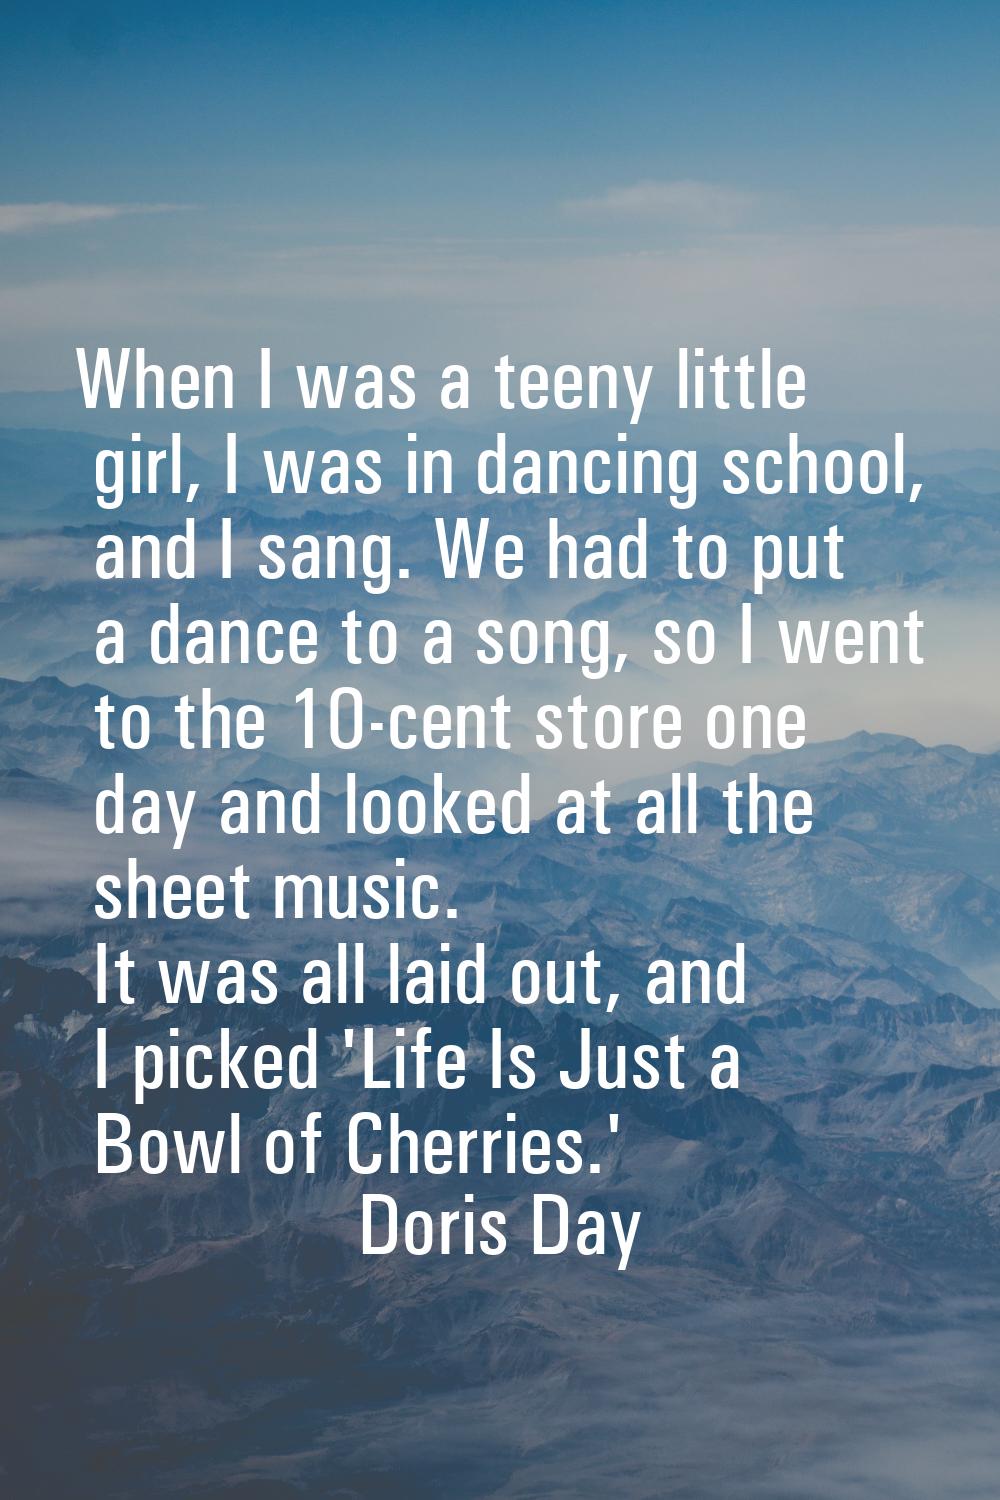 When I was a teeny little girl, I was in dancing school, and I sang. We had to put a dance to a son